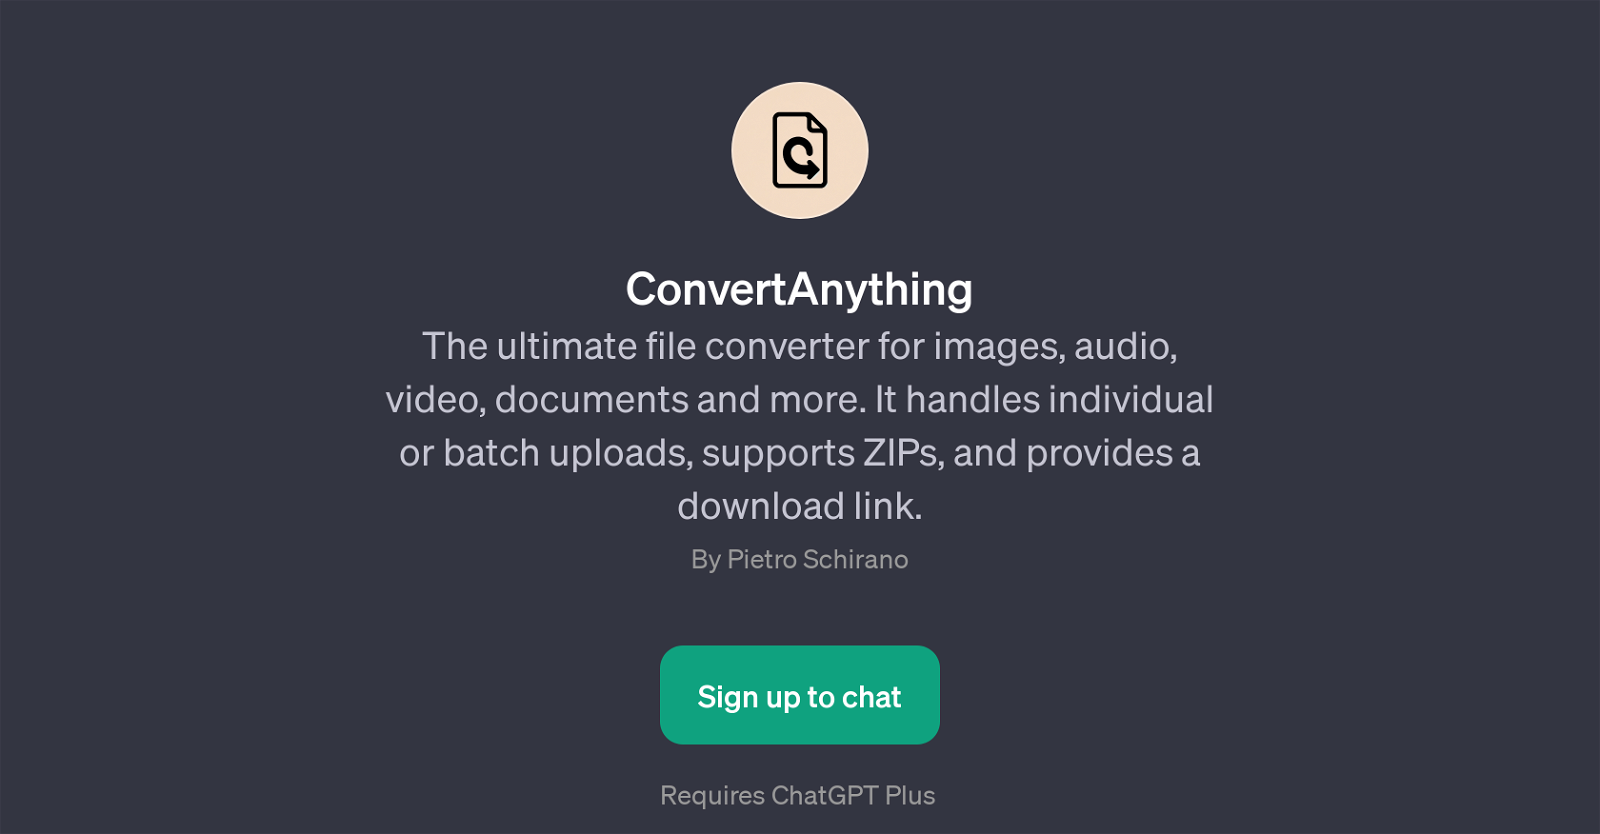 ConvertAnything website